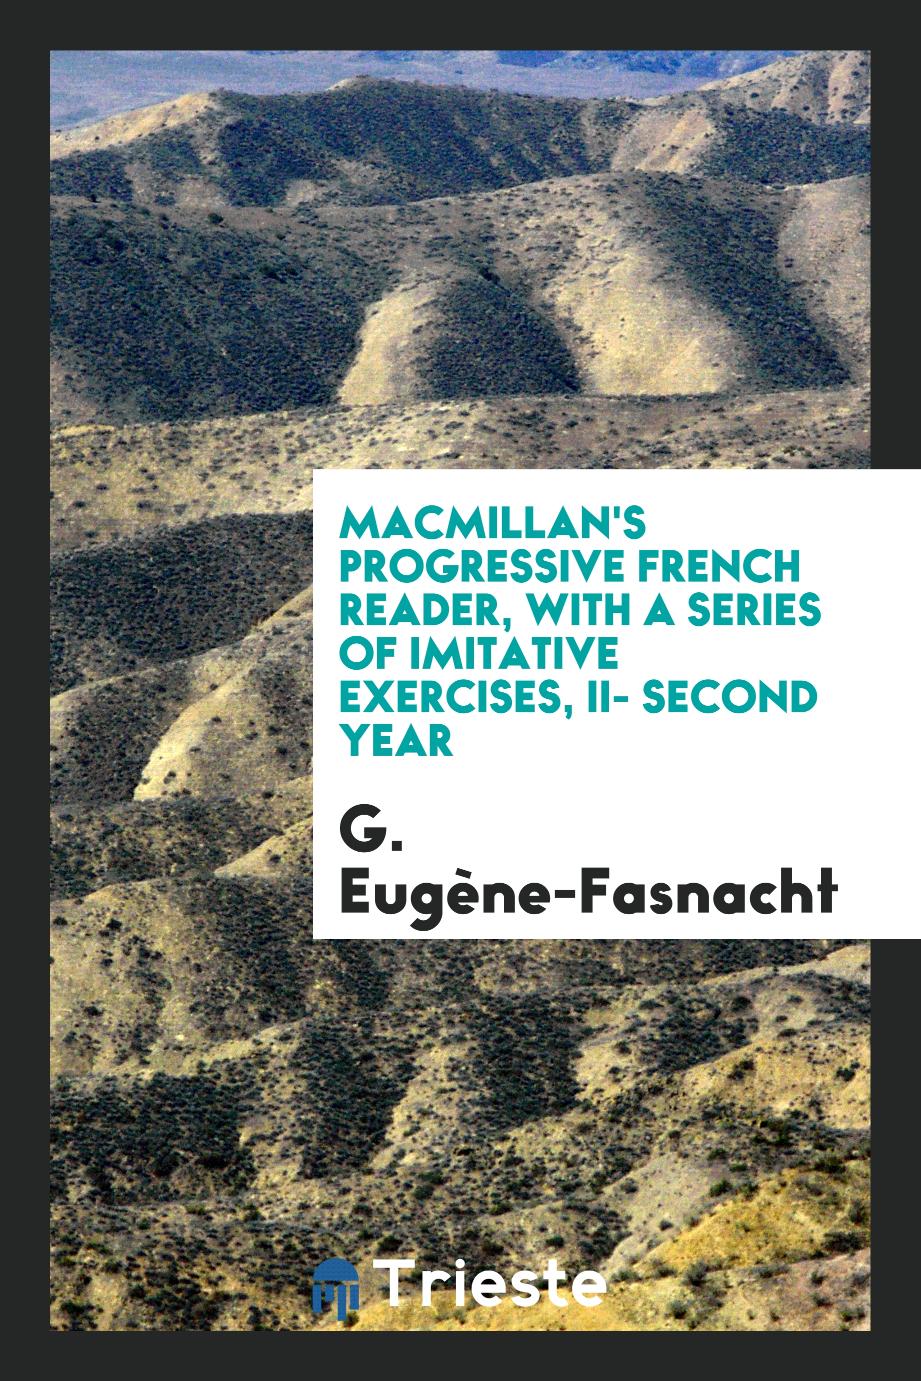 Macmillan's progressive French reader, with a series of imitative exercises, II- second year